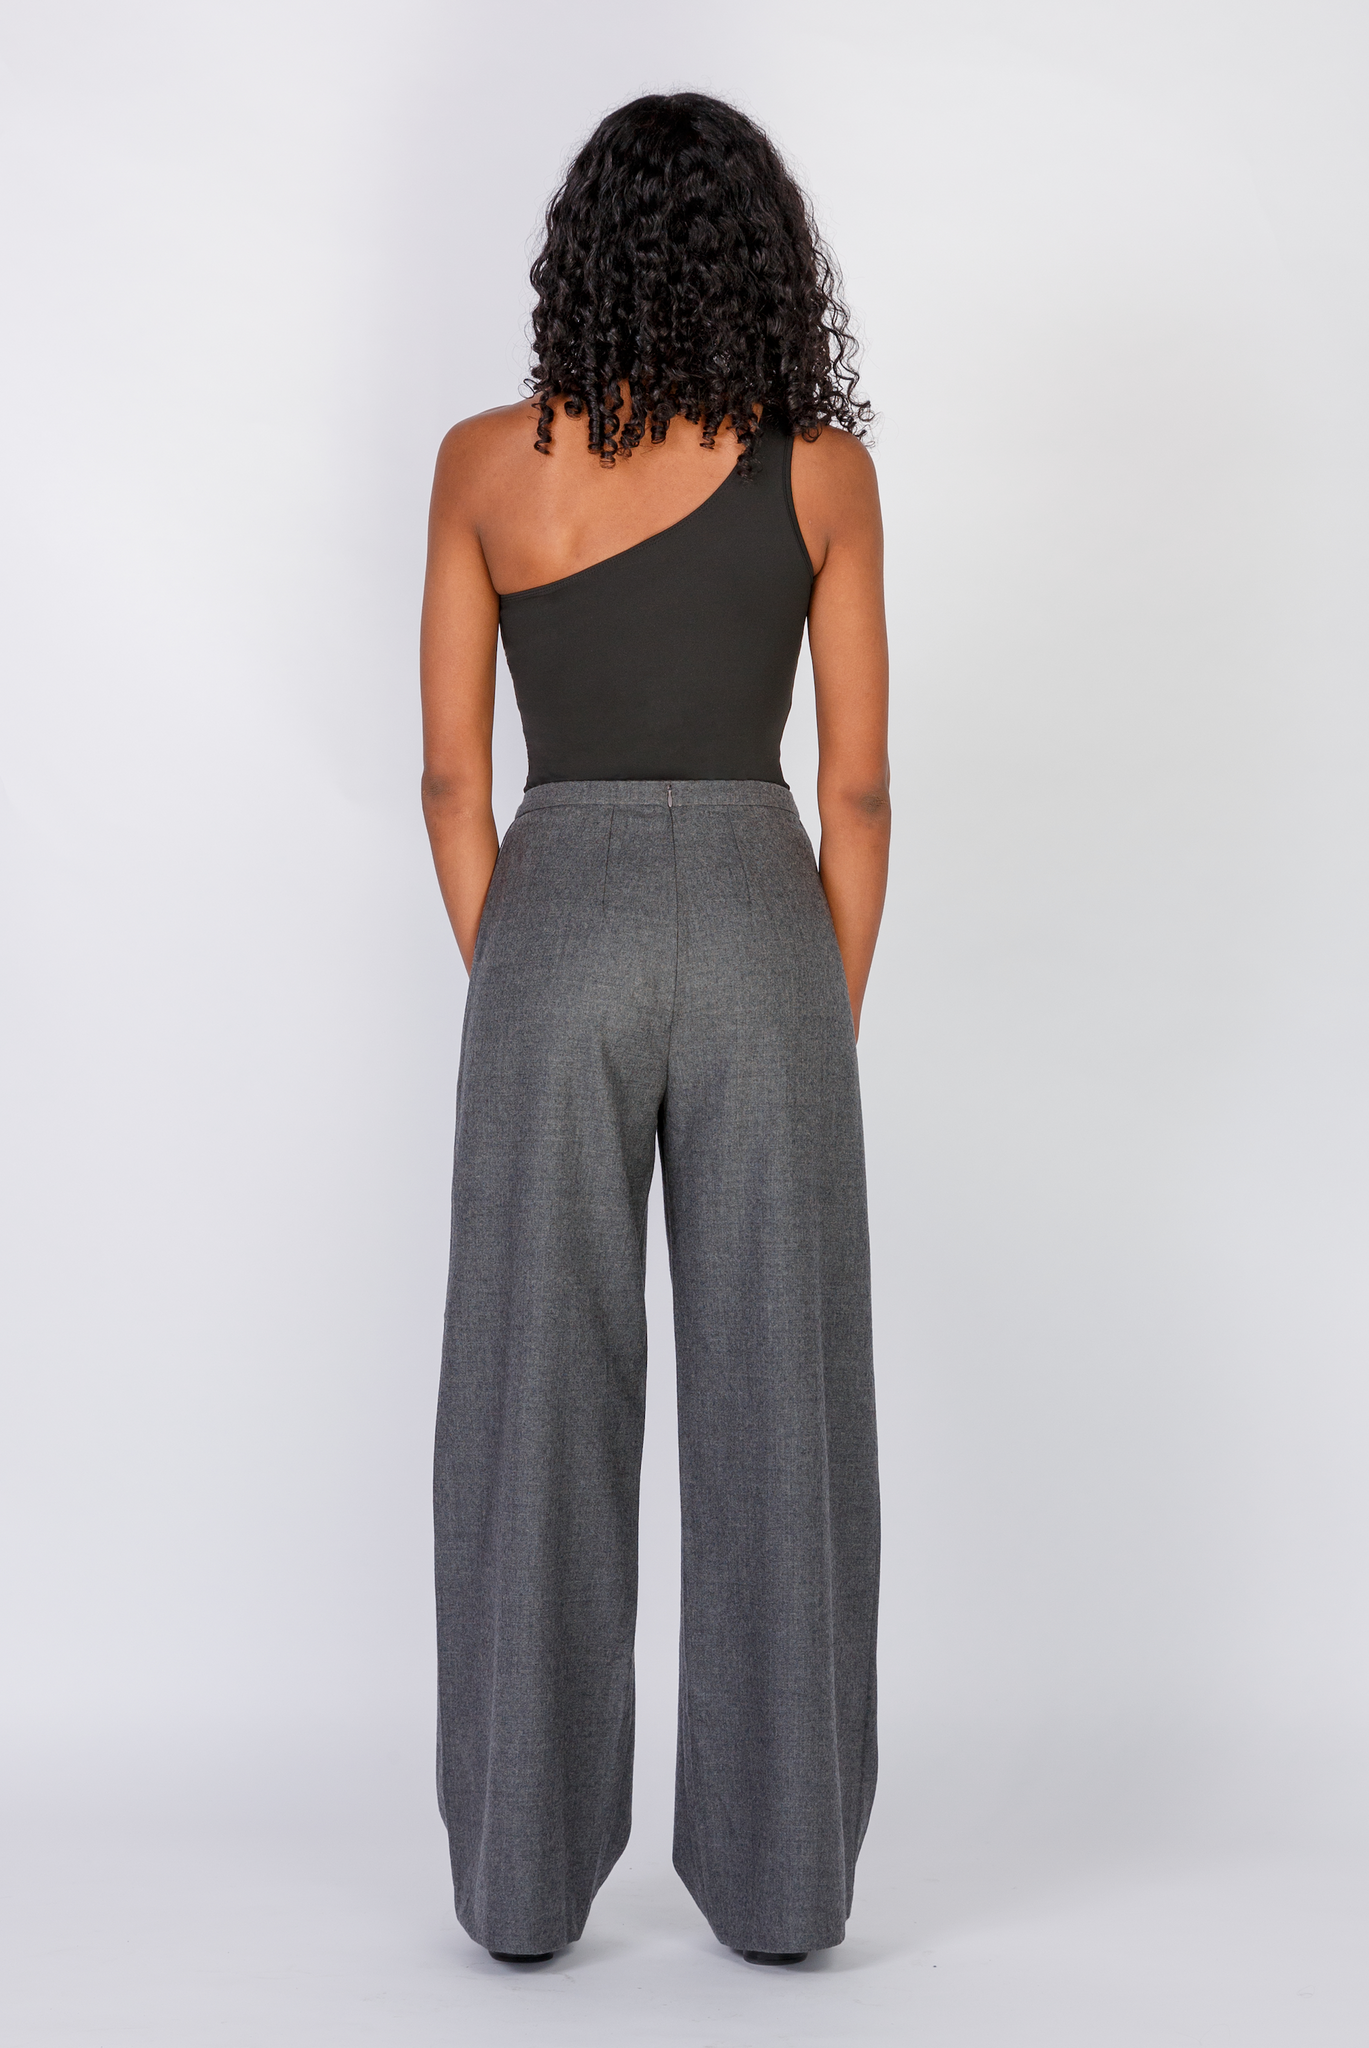 The Limited Edition Wool Wide Leg Pant by Aam is made for women with full hips and thighs. This is the back view of the pant, which shows the fit at the waist, hip and thigh. The pant comes in two colors - grey (pictured here) and black.